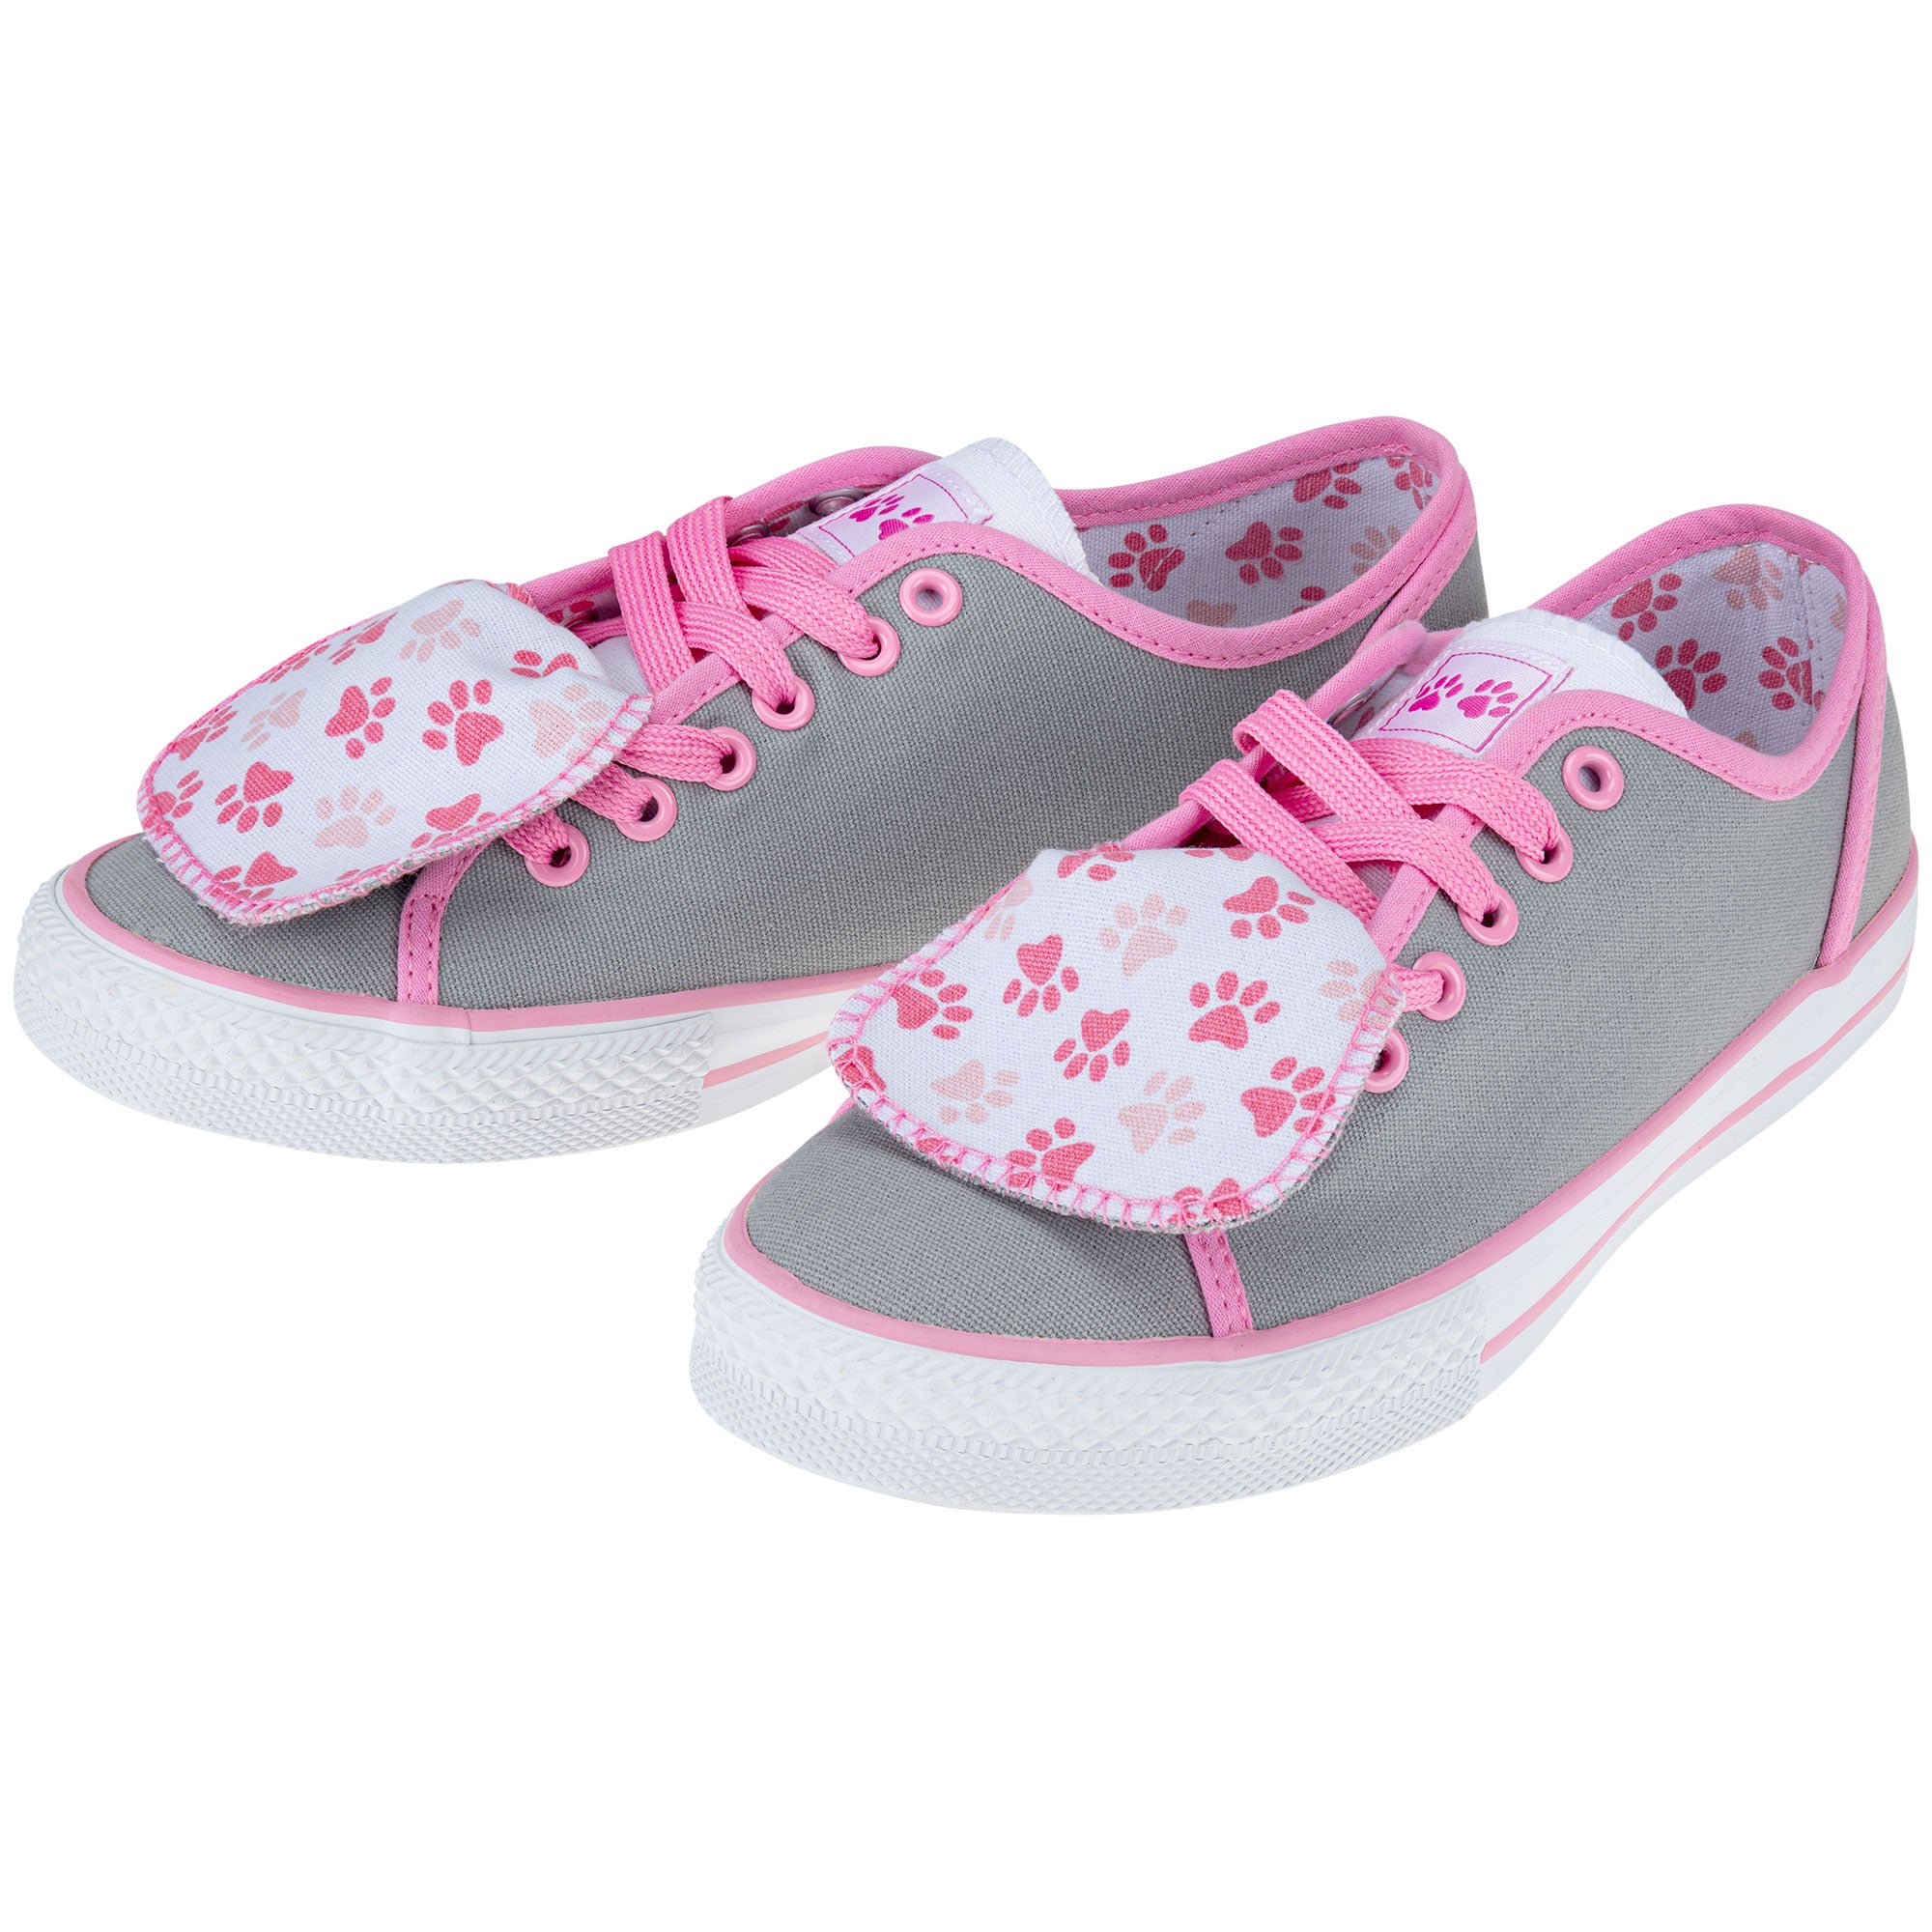 Women's Paw Print Low Top Shoes - All Over Paws - Gray/Pink - 9